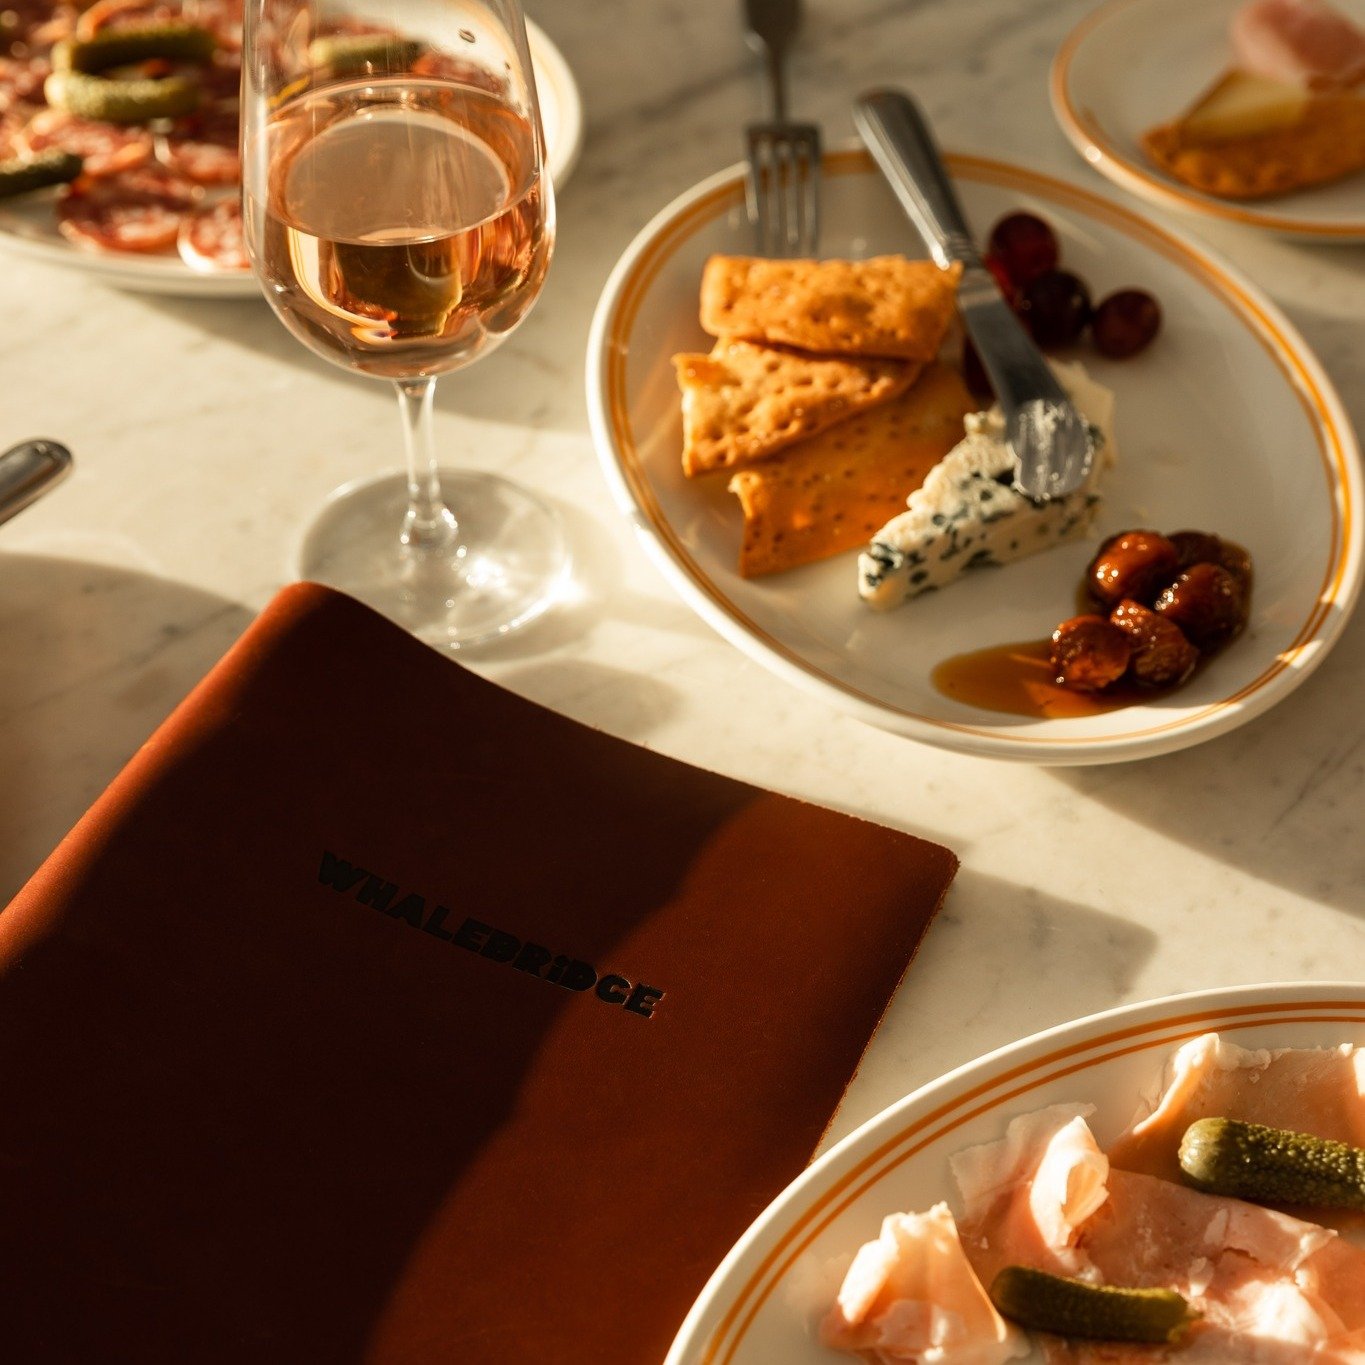 Soak up some Autumn sunshine, sip on a spritz and enjoy some share plates.
Join us at the Bar for Happy Hour from 4pm -6pm weekdays. 

$10 Negronis &amp; Aperol Spritz
$7 Beers, wines &amp; spirits

Bar/ South Side location only.
No bookings required